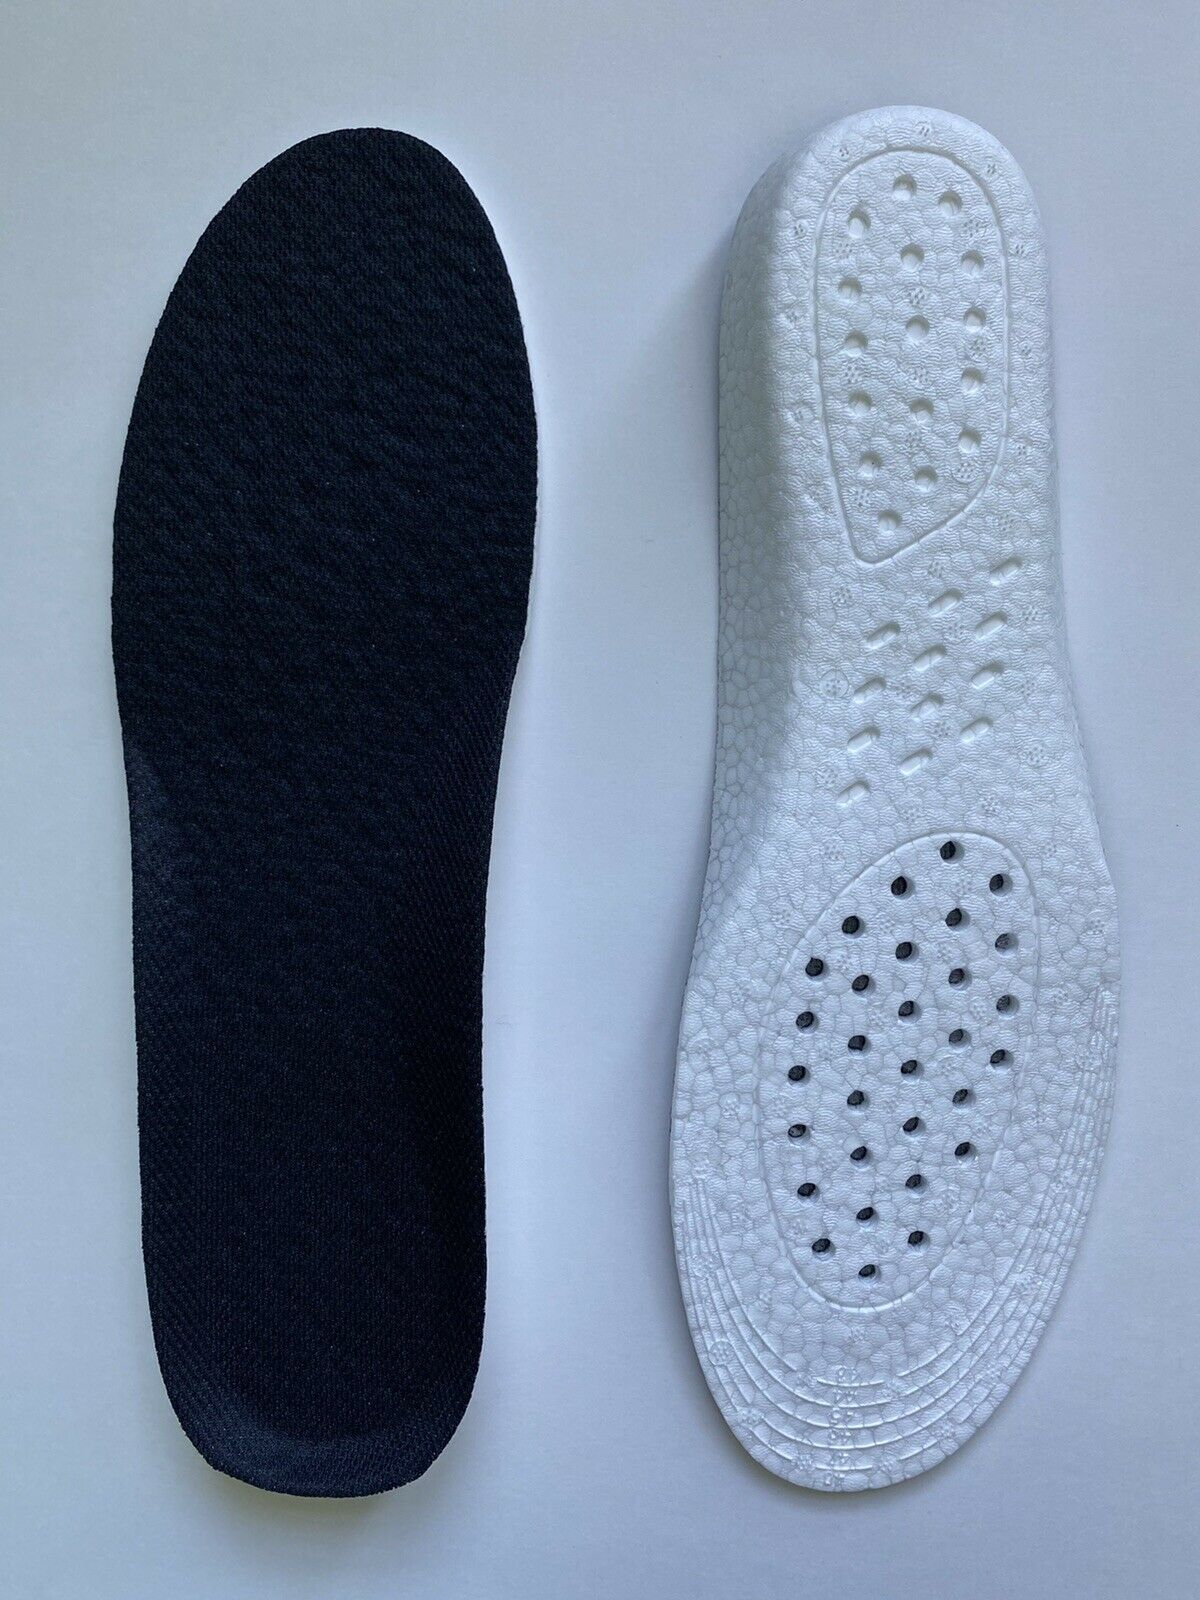 Boost Material Insole Replacement for Nike and Adidas Shoes